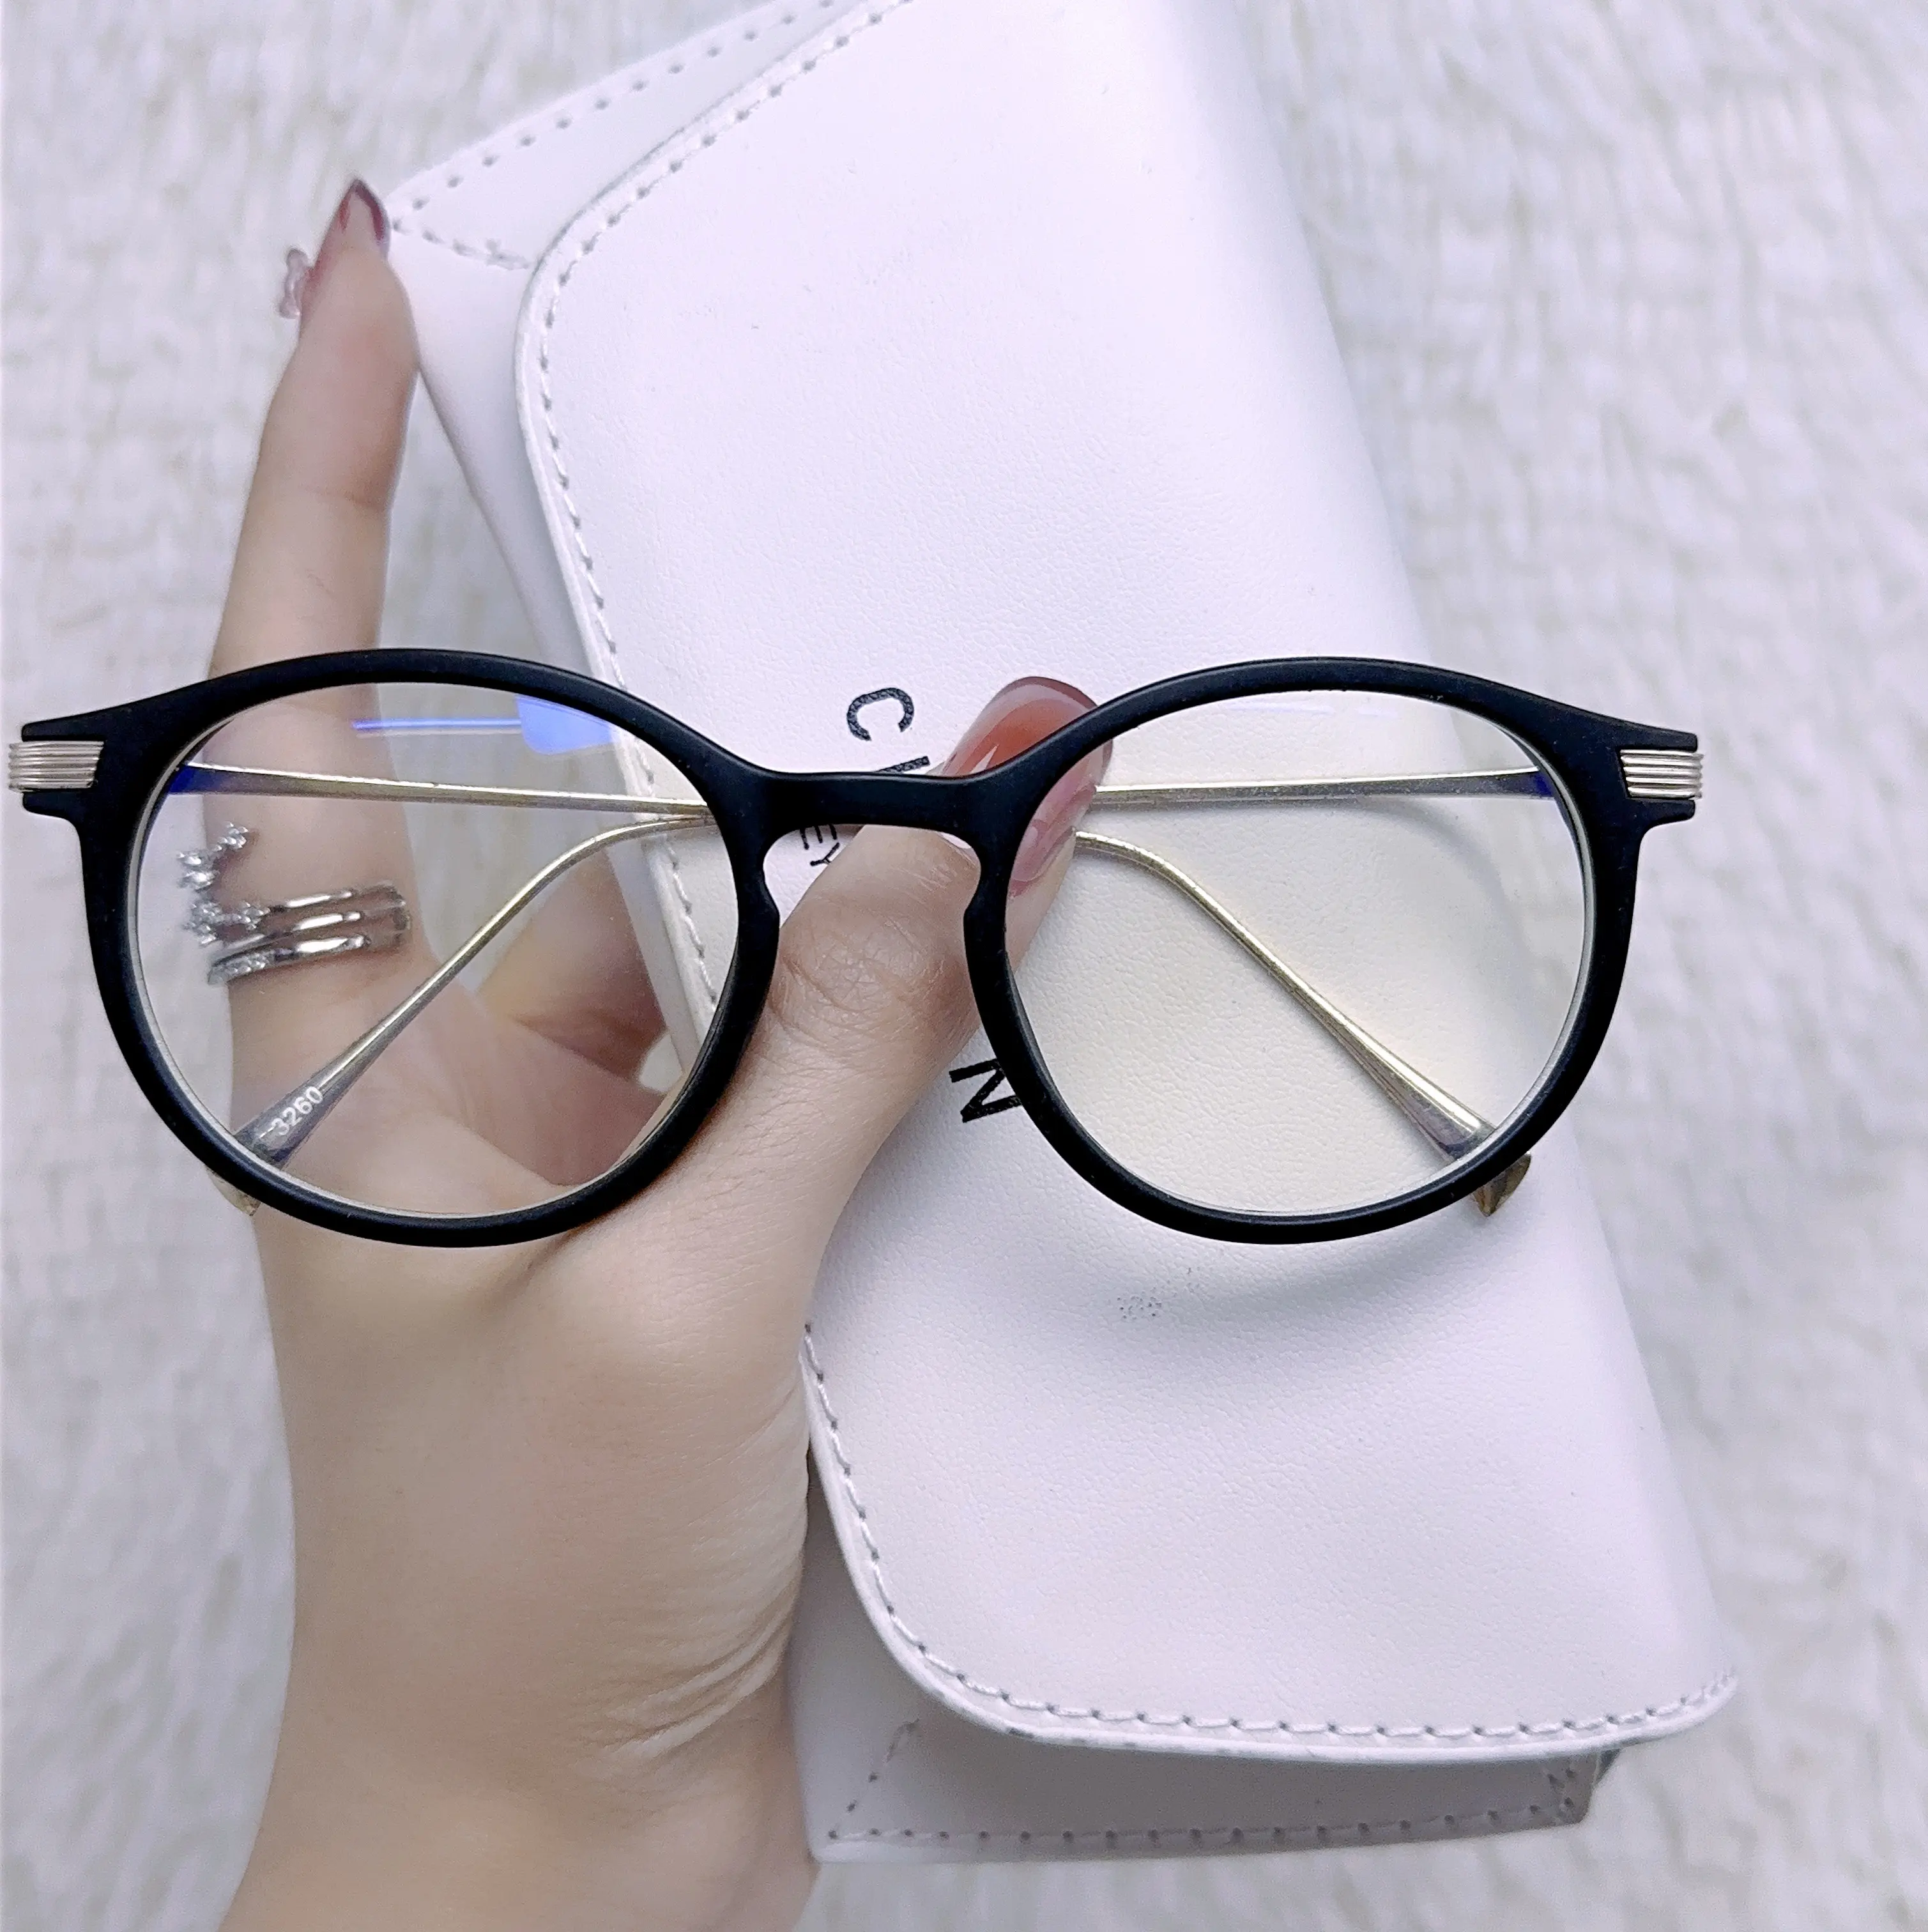 The manufacturer's hot selling men's and women's PC round frame glasses can be equipped with myopia lens frames